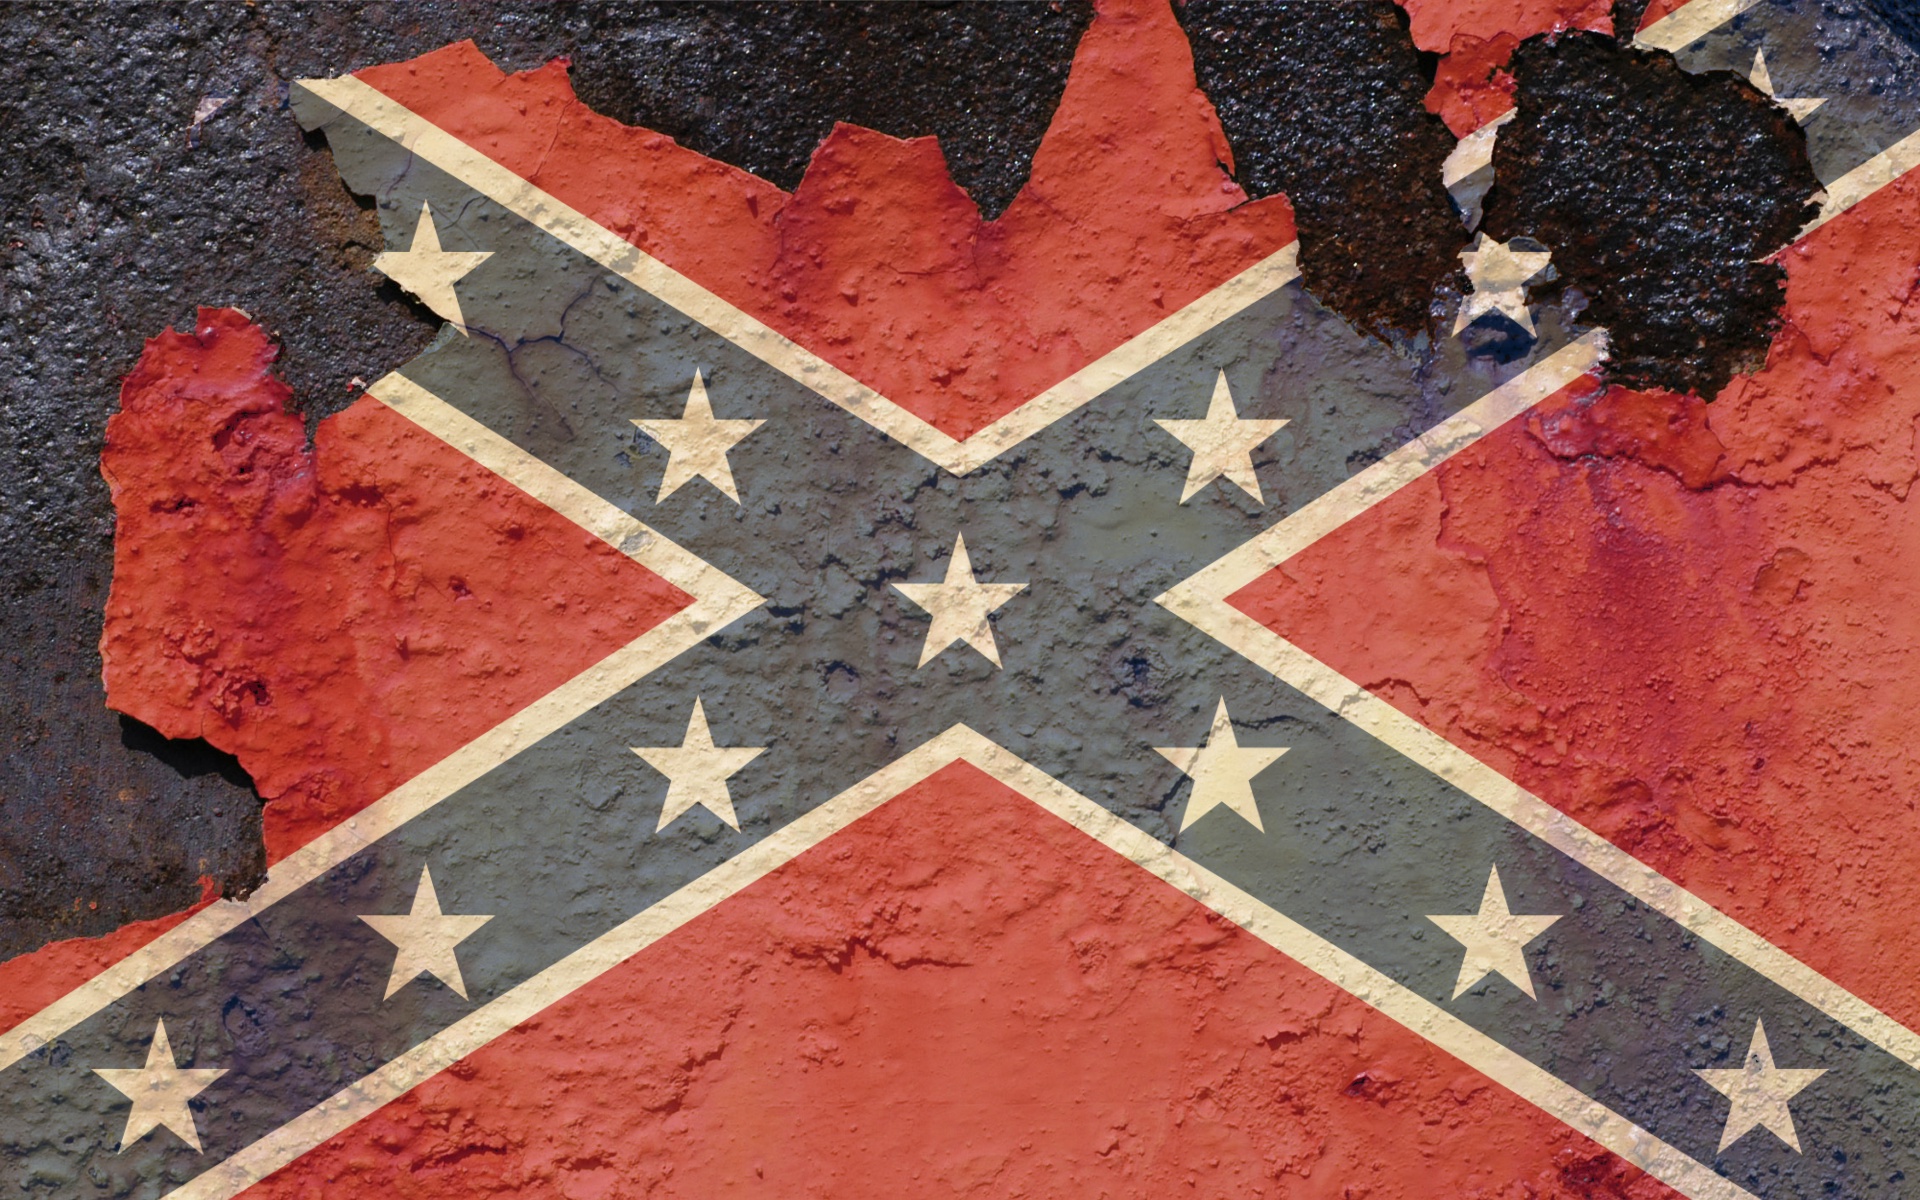 Free Download Grunge Flags Wallpaper 1920x1200 Grunge Flags Confederate 1920x1200 For Your Desktop Mobile Tablet Explore 48 Iphone Confederate Flag Wallpaper Confederate Flag Wallpaper For Phone Rebel Flag Phone